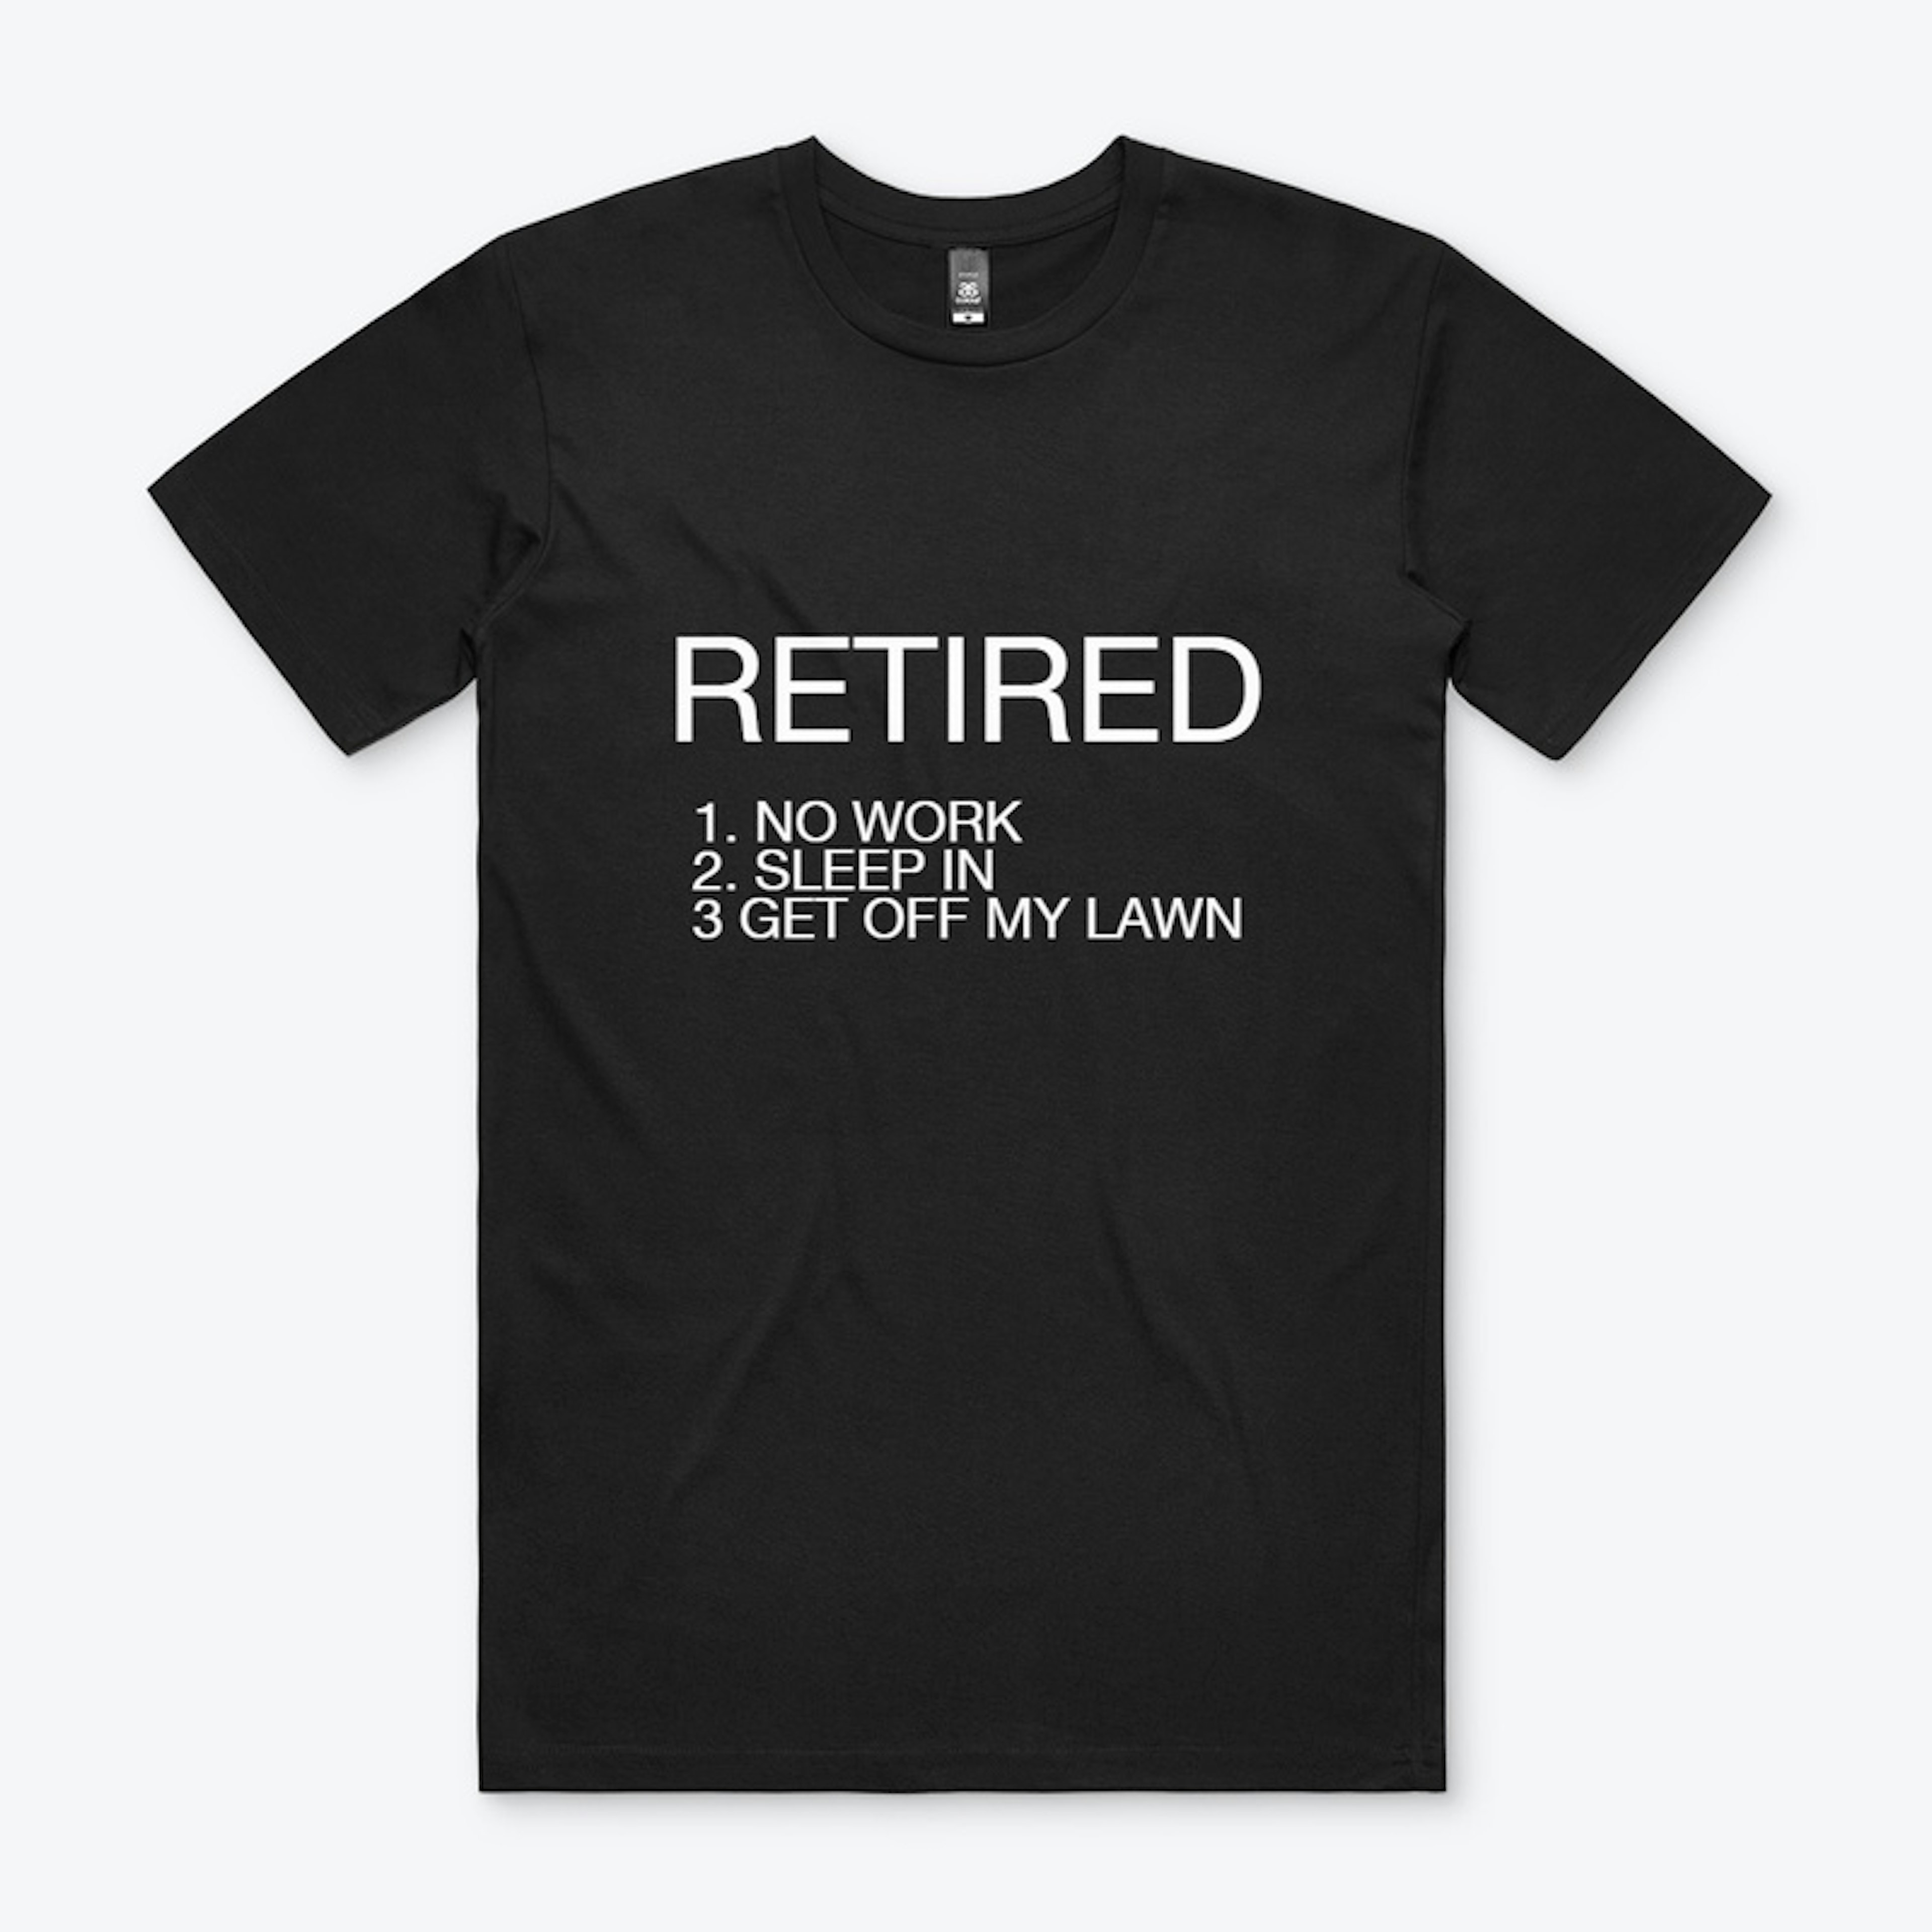 Men's Retired Tee With steps 